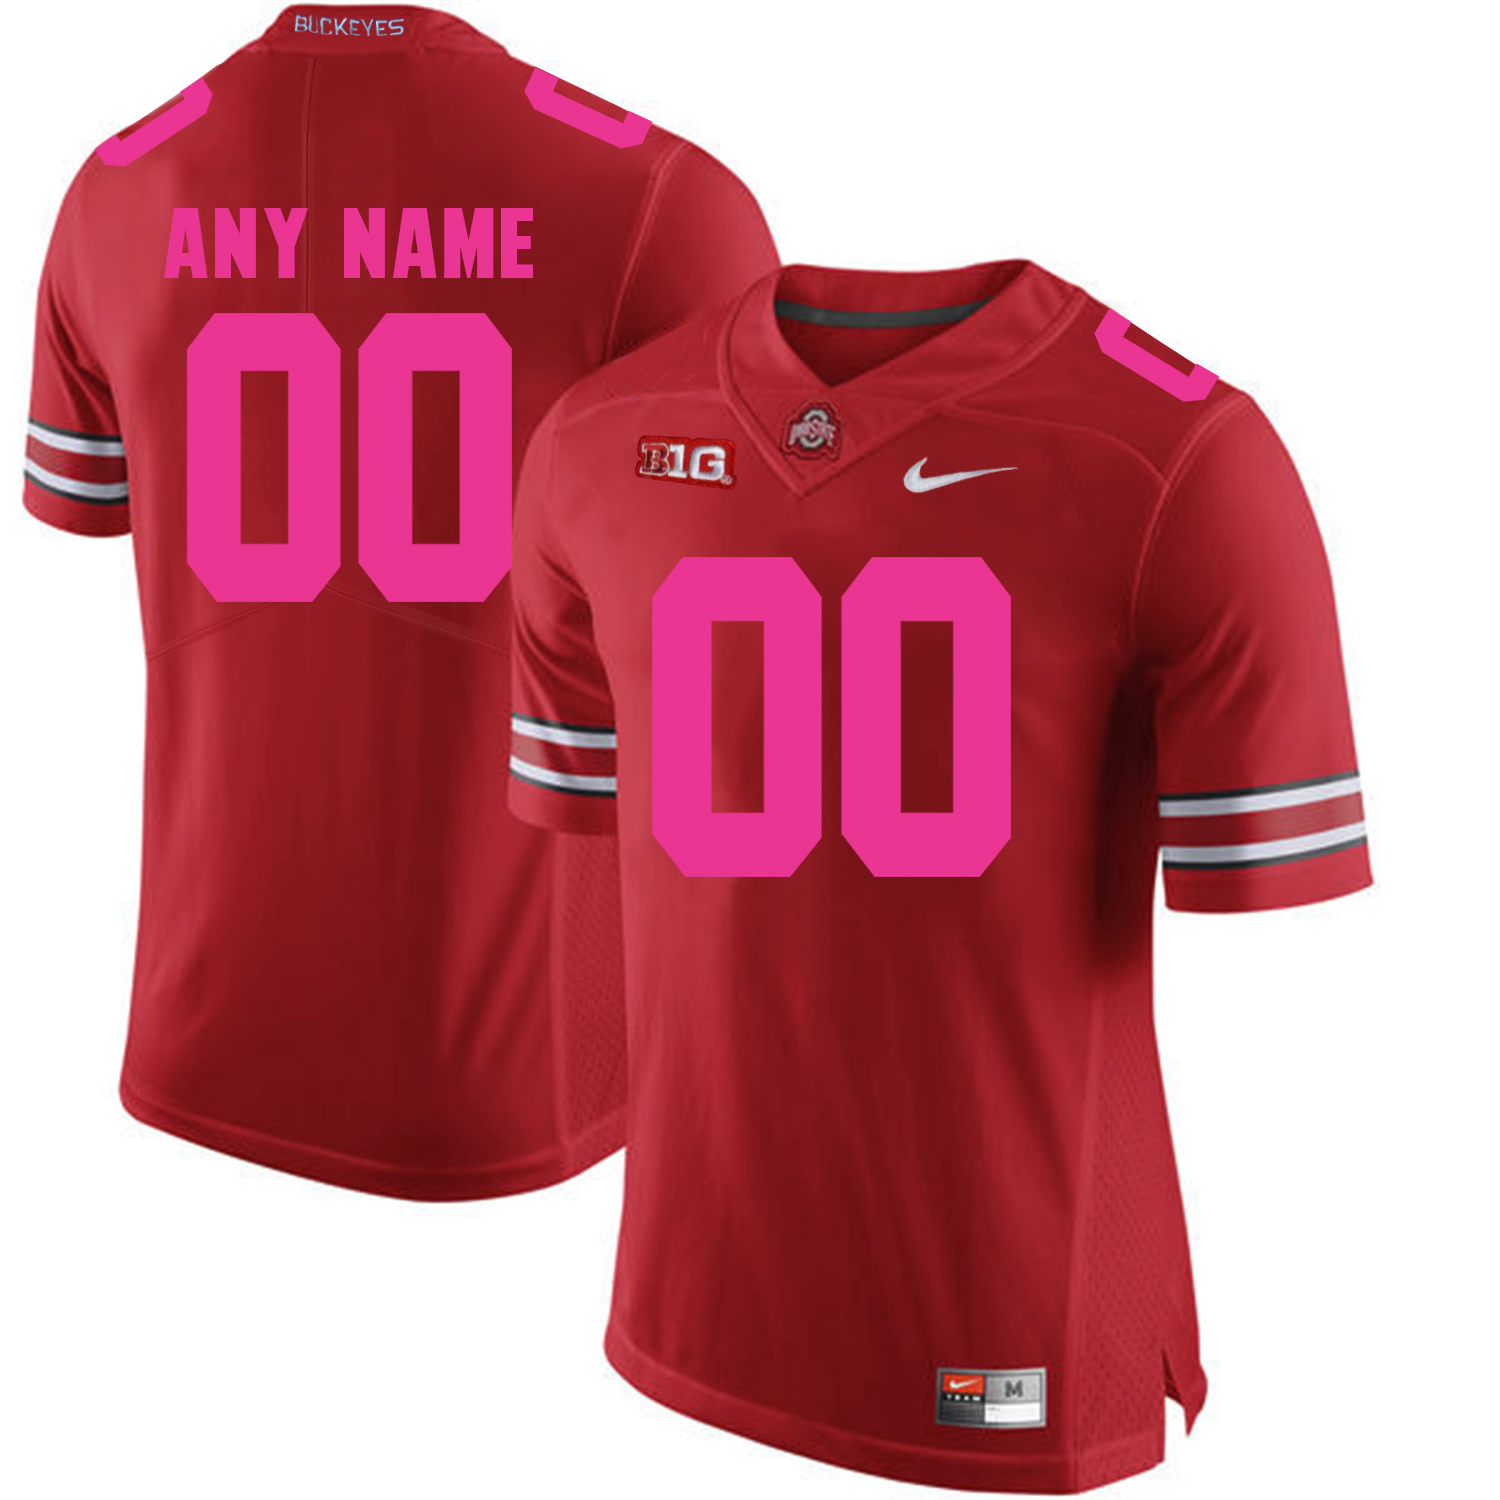 Ohio State Buckeyes Red 2018 Breast Cancer Awareness Men's Customized College Football Jersey